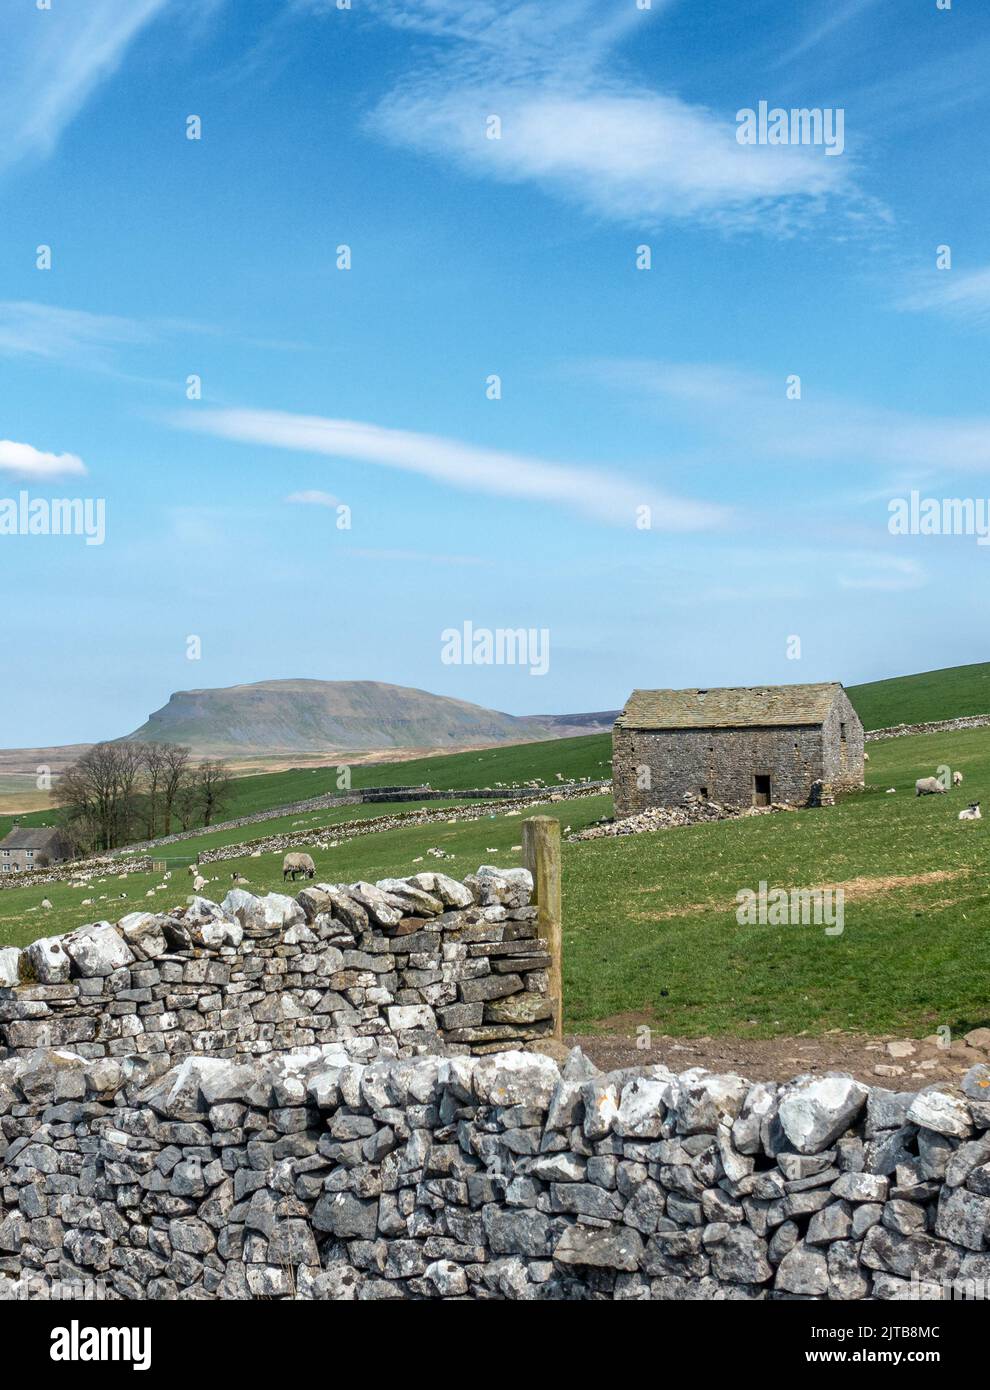 View from Henside Road from Malham Moor, looking at Pen-y-ghent mountain and an old stone barn, Yorkshire Dales National Park, England, UK Stock Photo